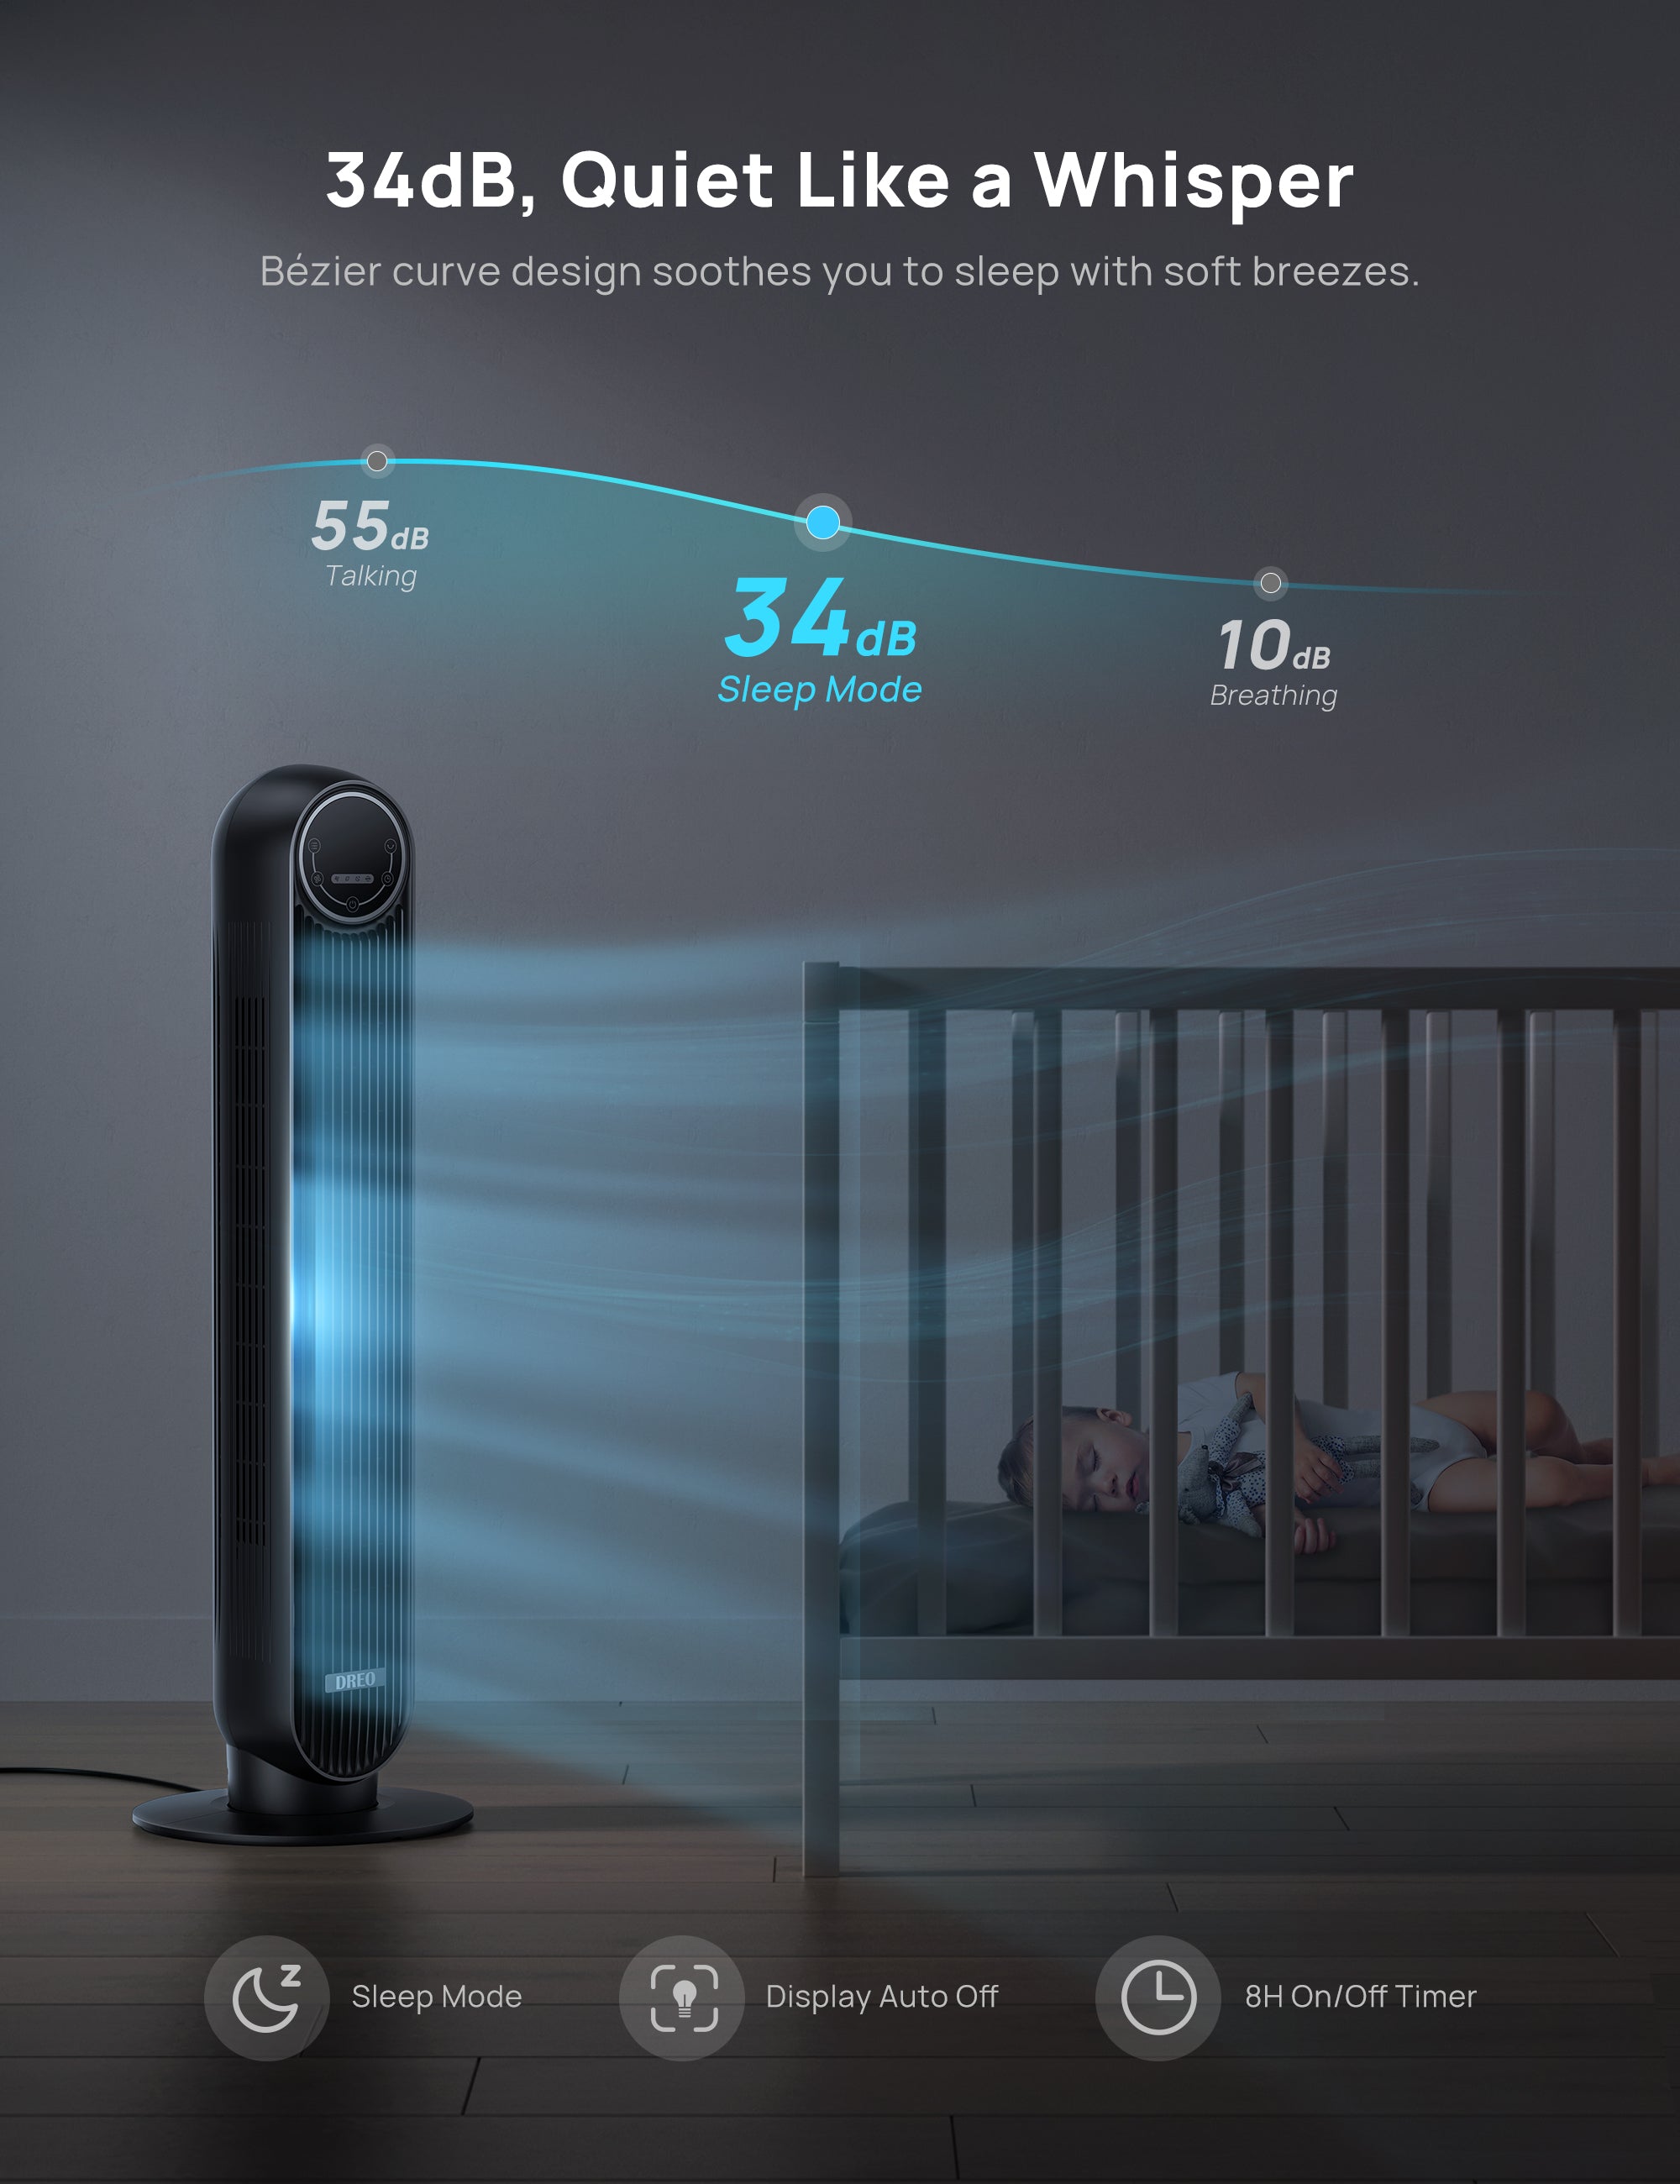 Beat the Heat With This $55 Dreo Tower Fan ($45 Off) - CNET